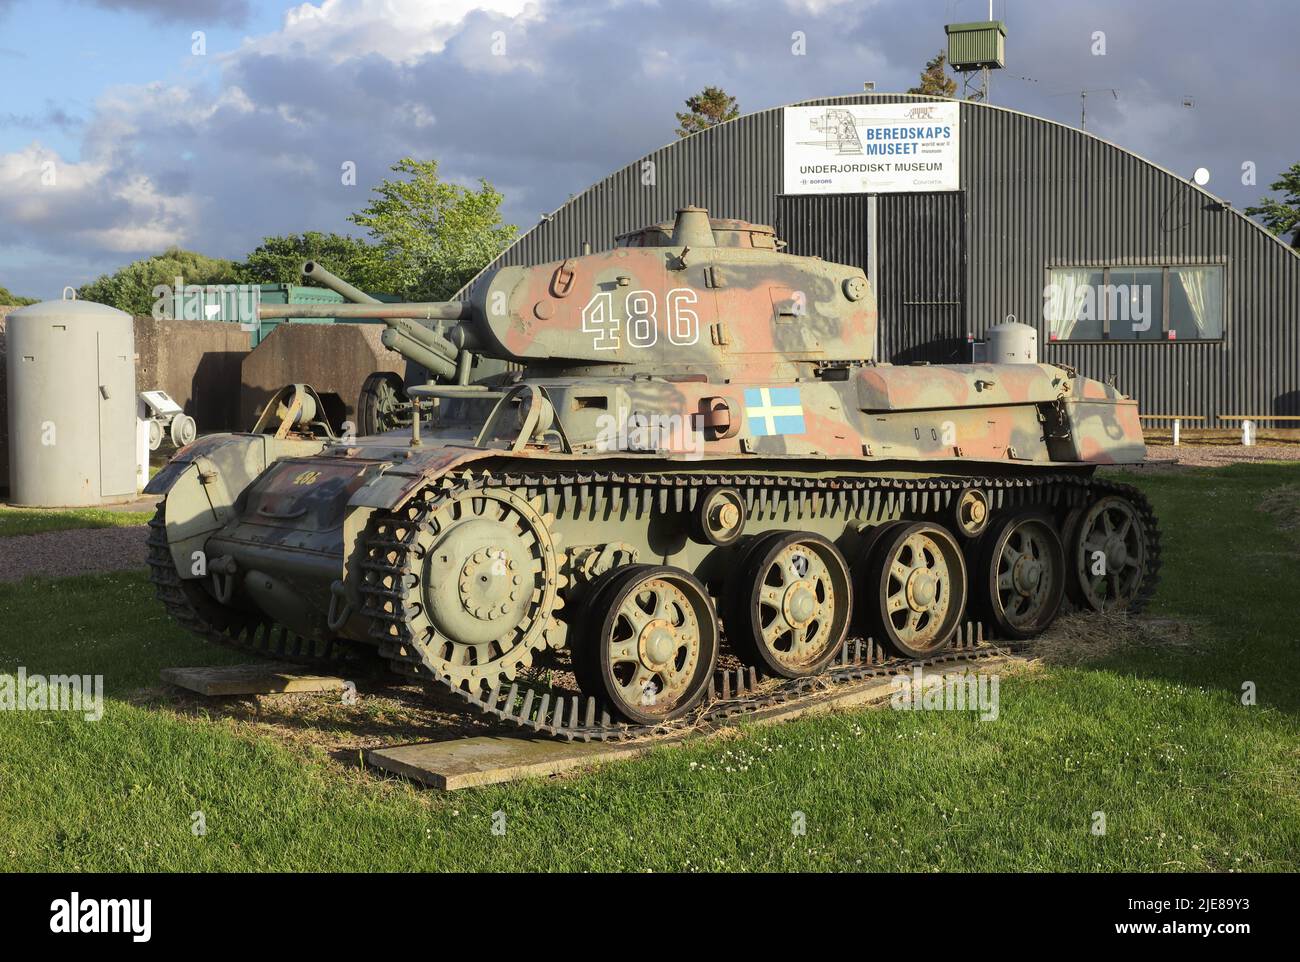 Helsingborg, Sweden - June 13, 2022: A tank m/40 in front of the Military Readiness Museum, Beredeskapsmuseet, located at Djuramossa. Stock Photo